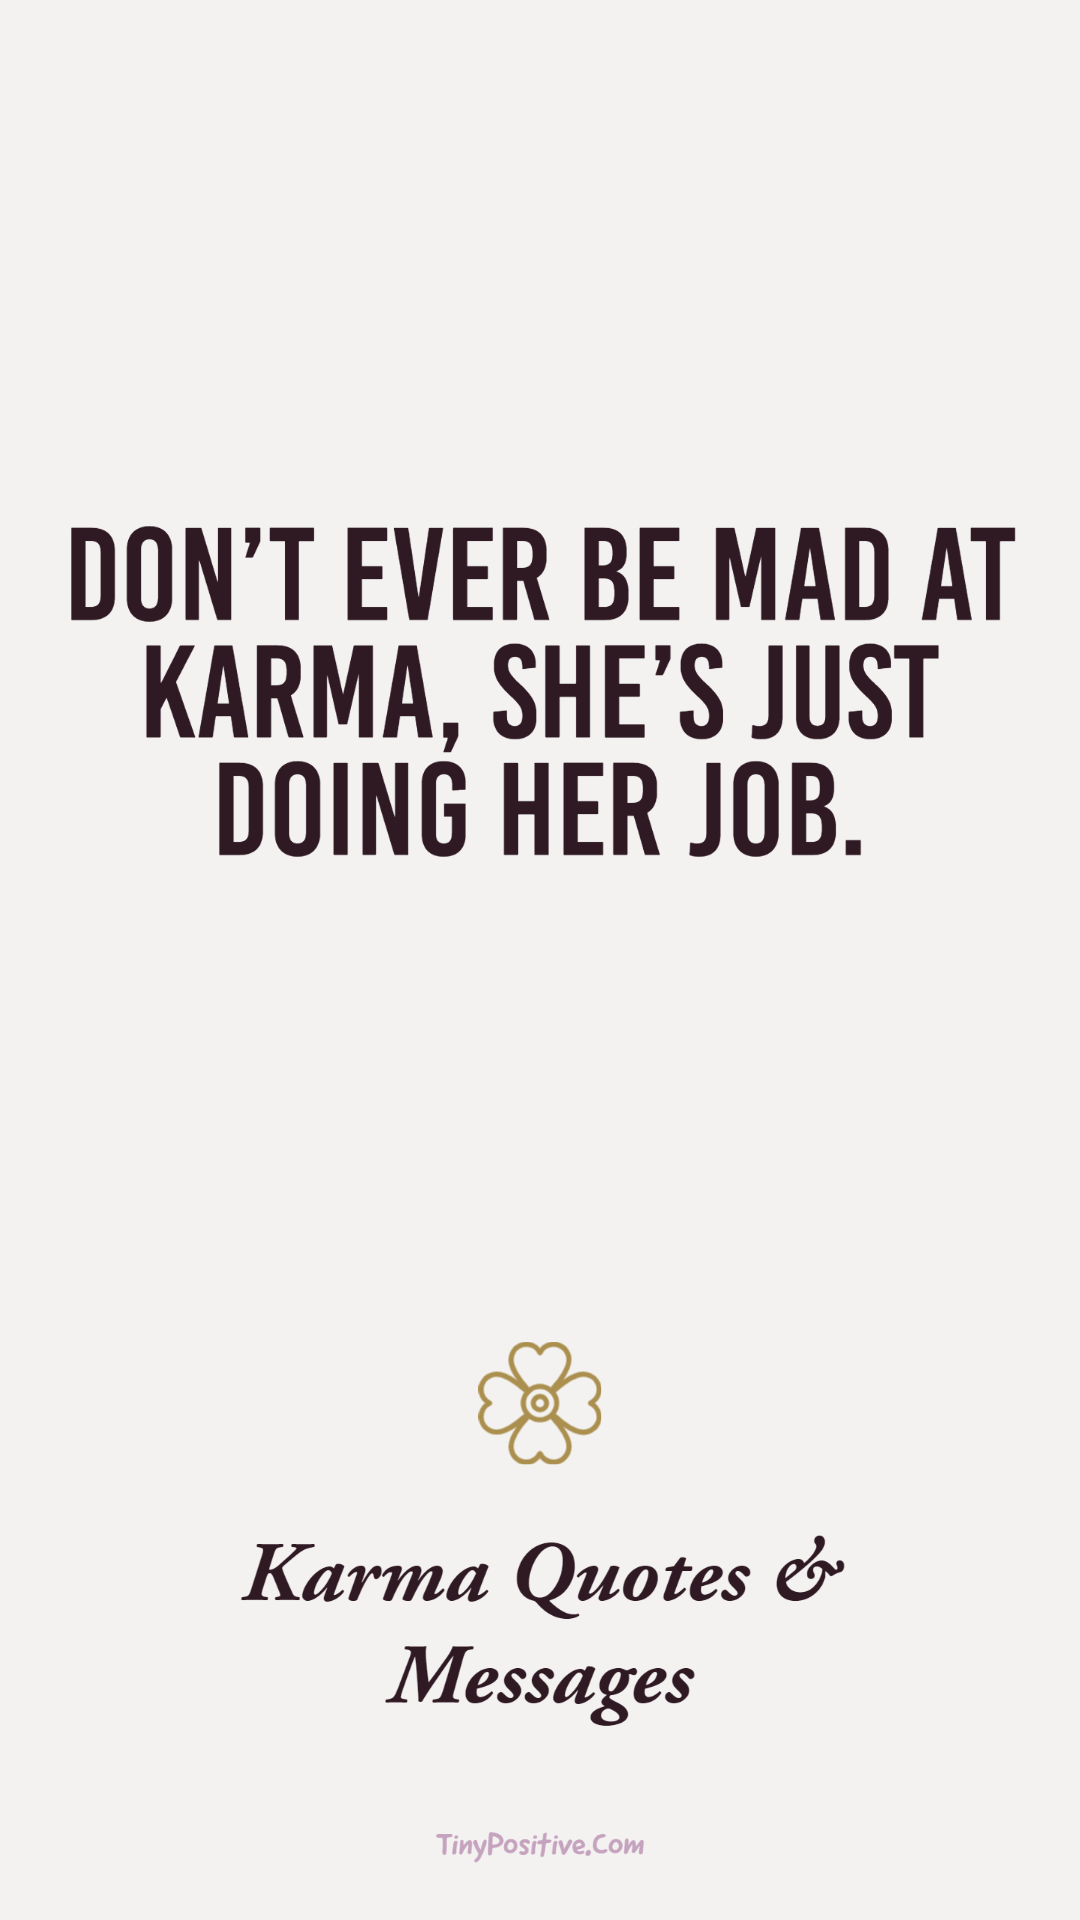 powerful karma quotes to inspire you and positive images